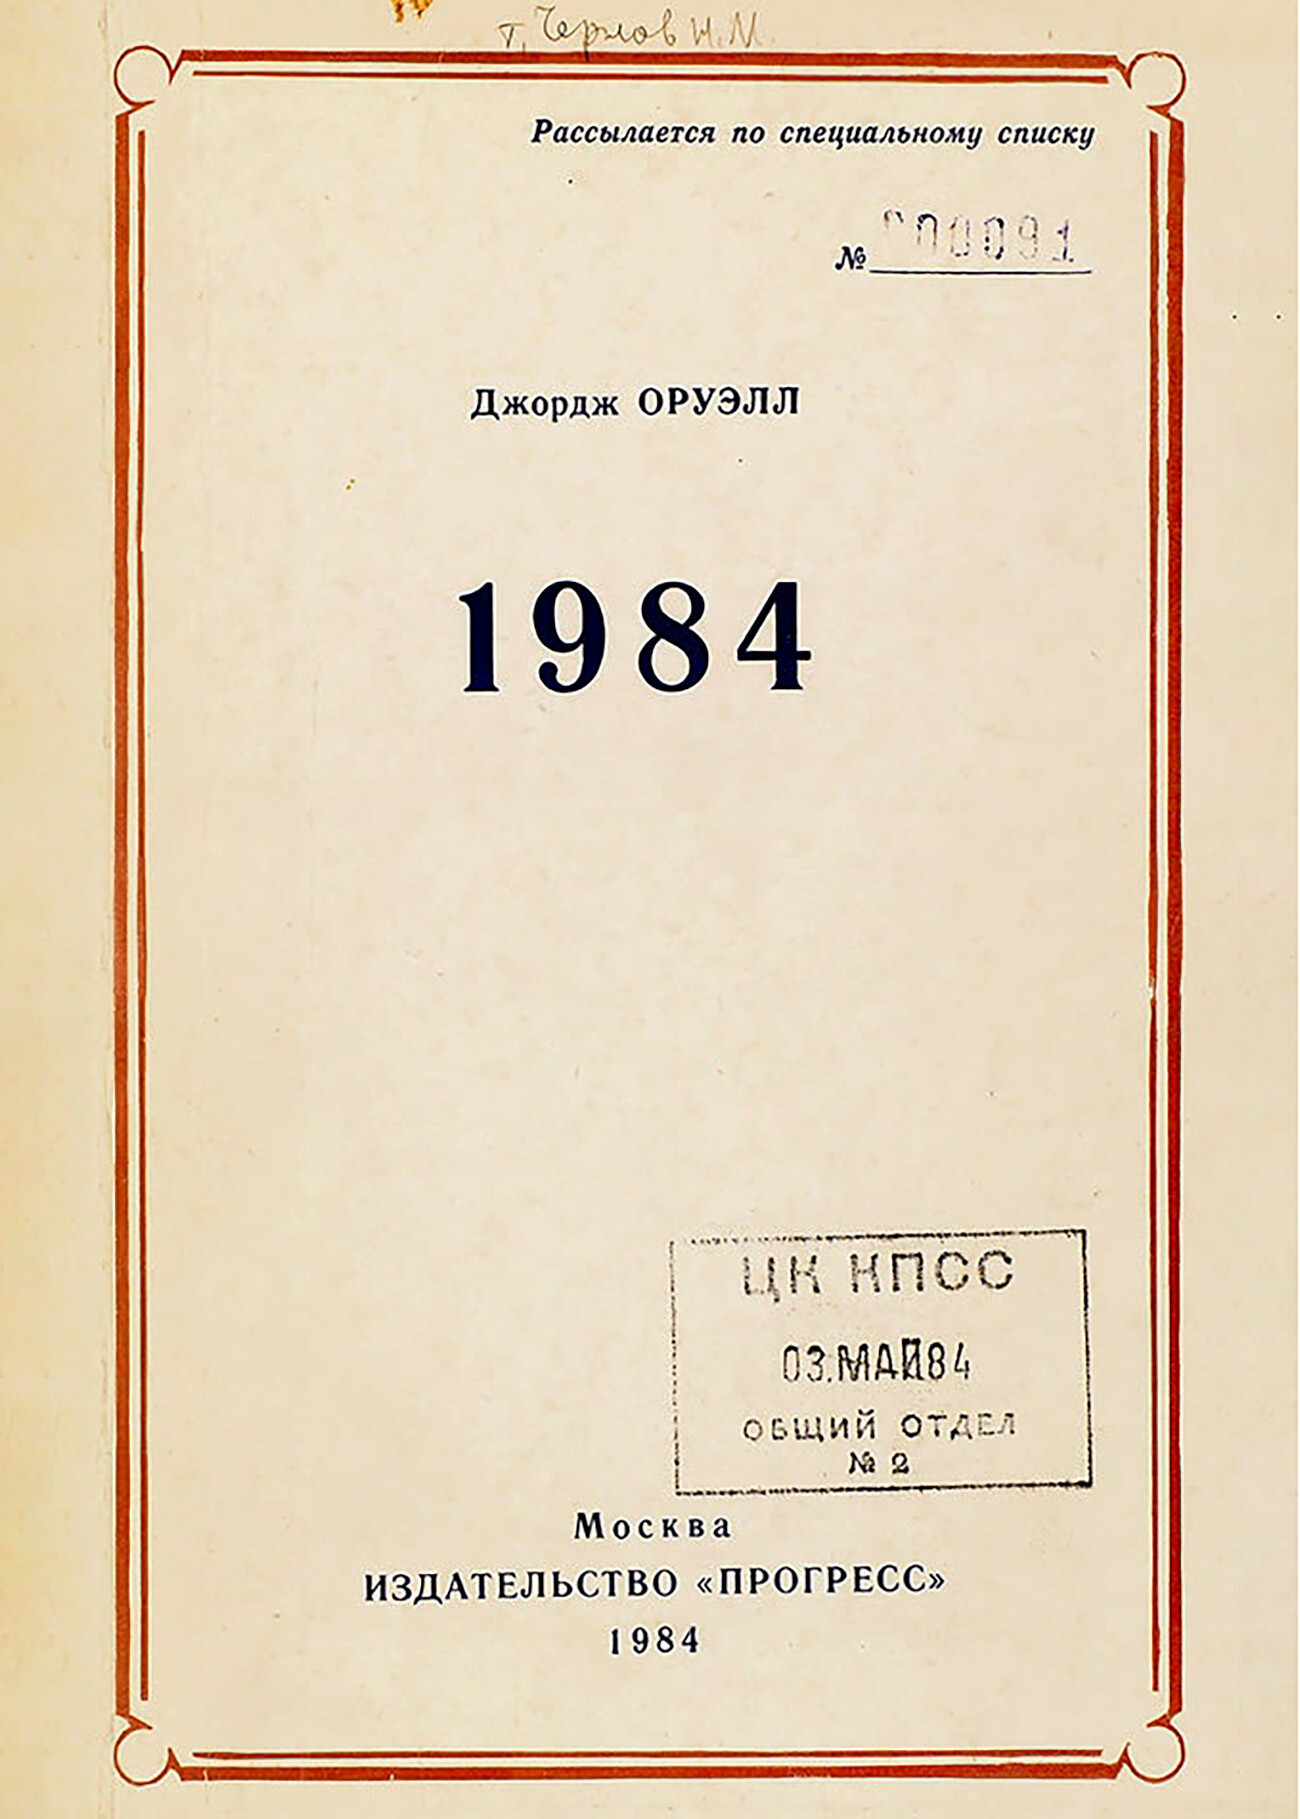 George Orwell. 1984. A copy that was distributed according to a special list approved by the Communist Party.